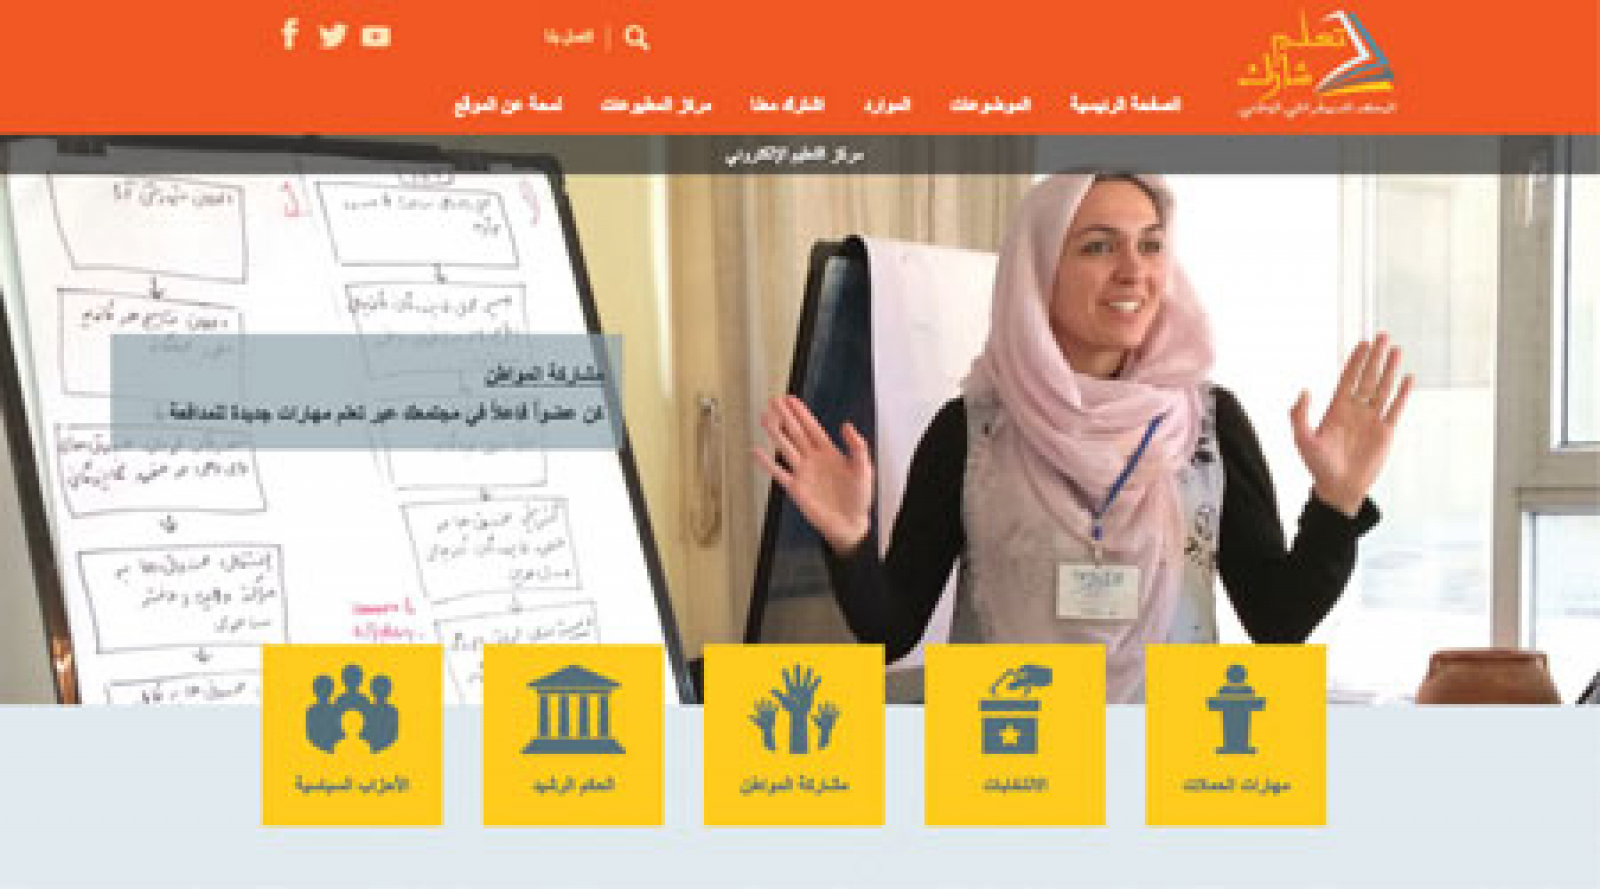 Facebook and PeaceTech Lab Join NDI at Launch of Arabic-Language E-Learning Platform